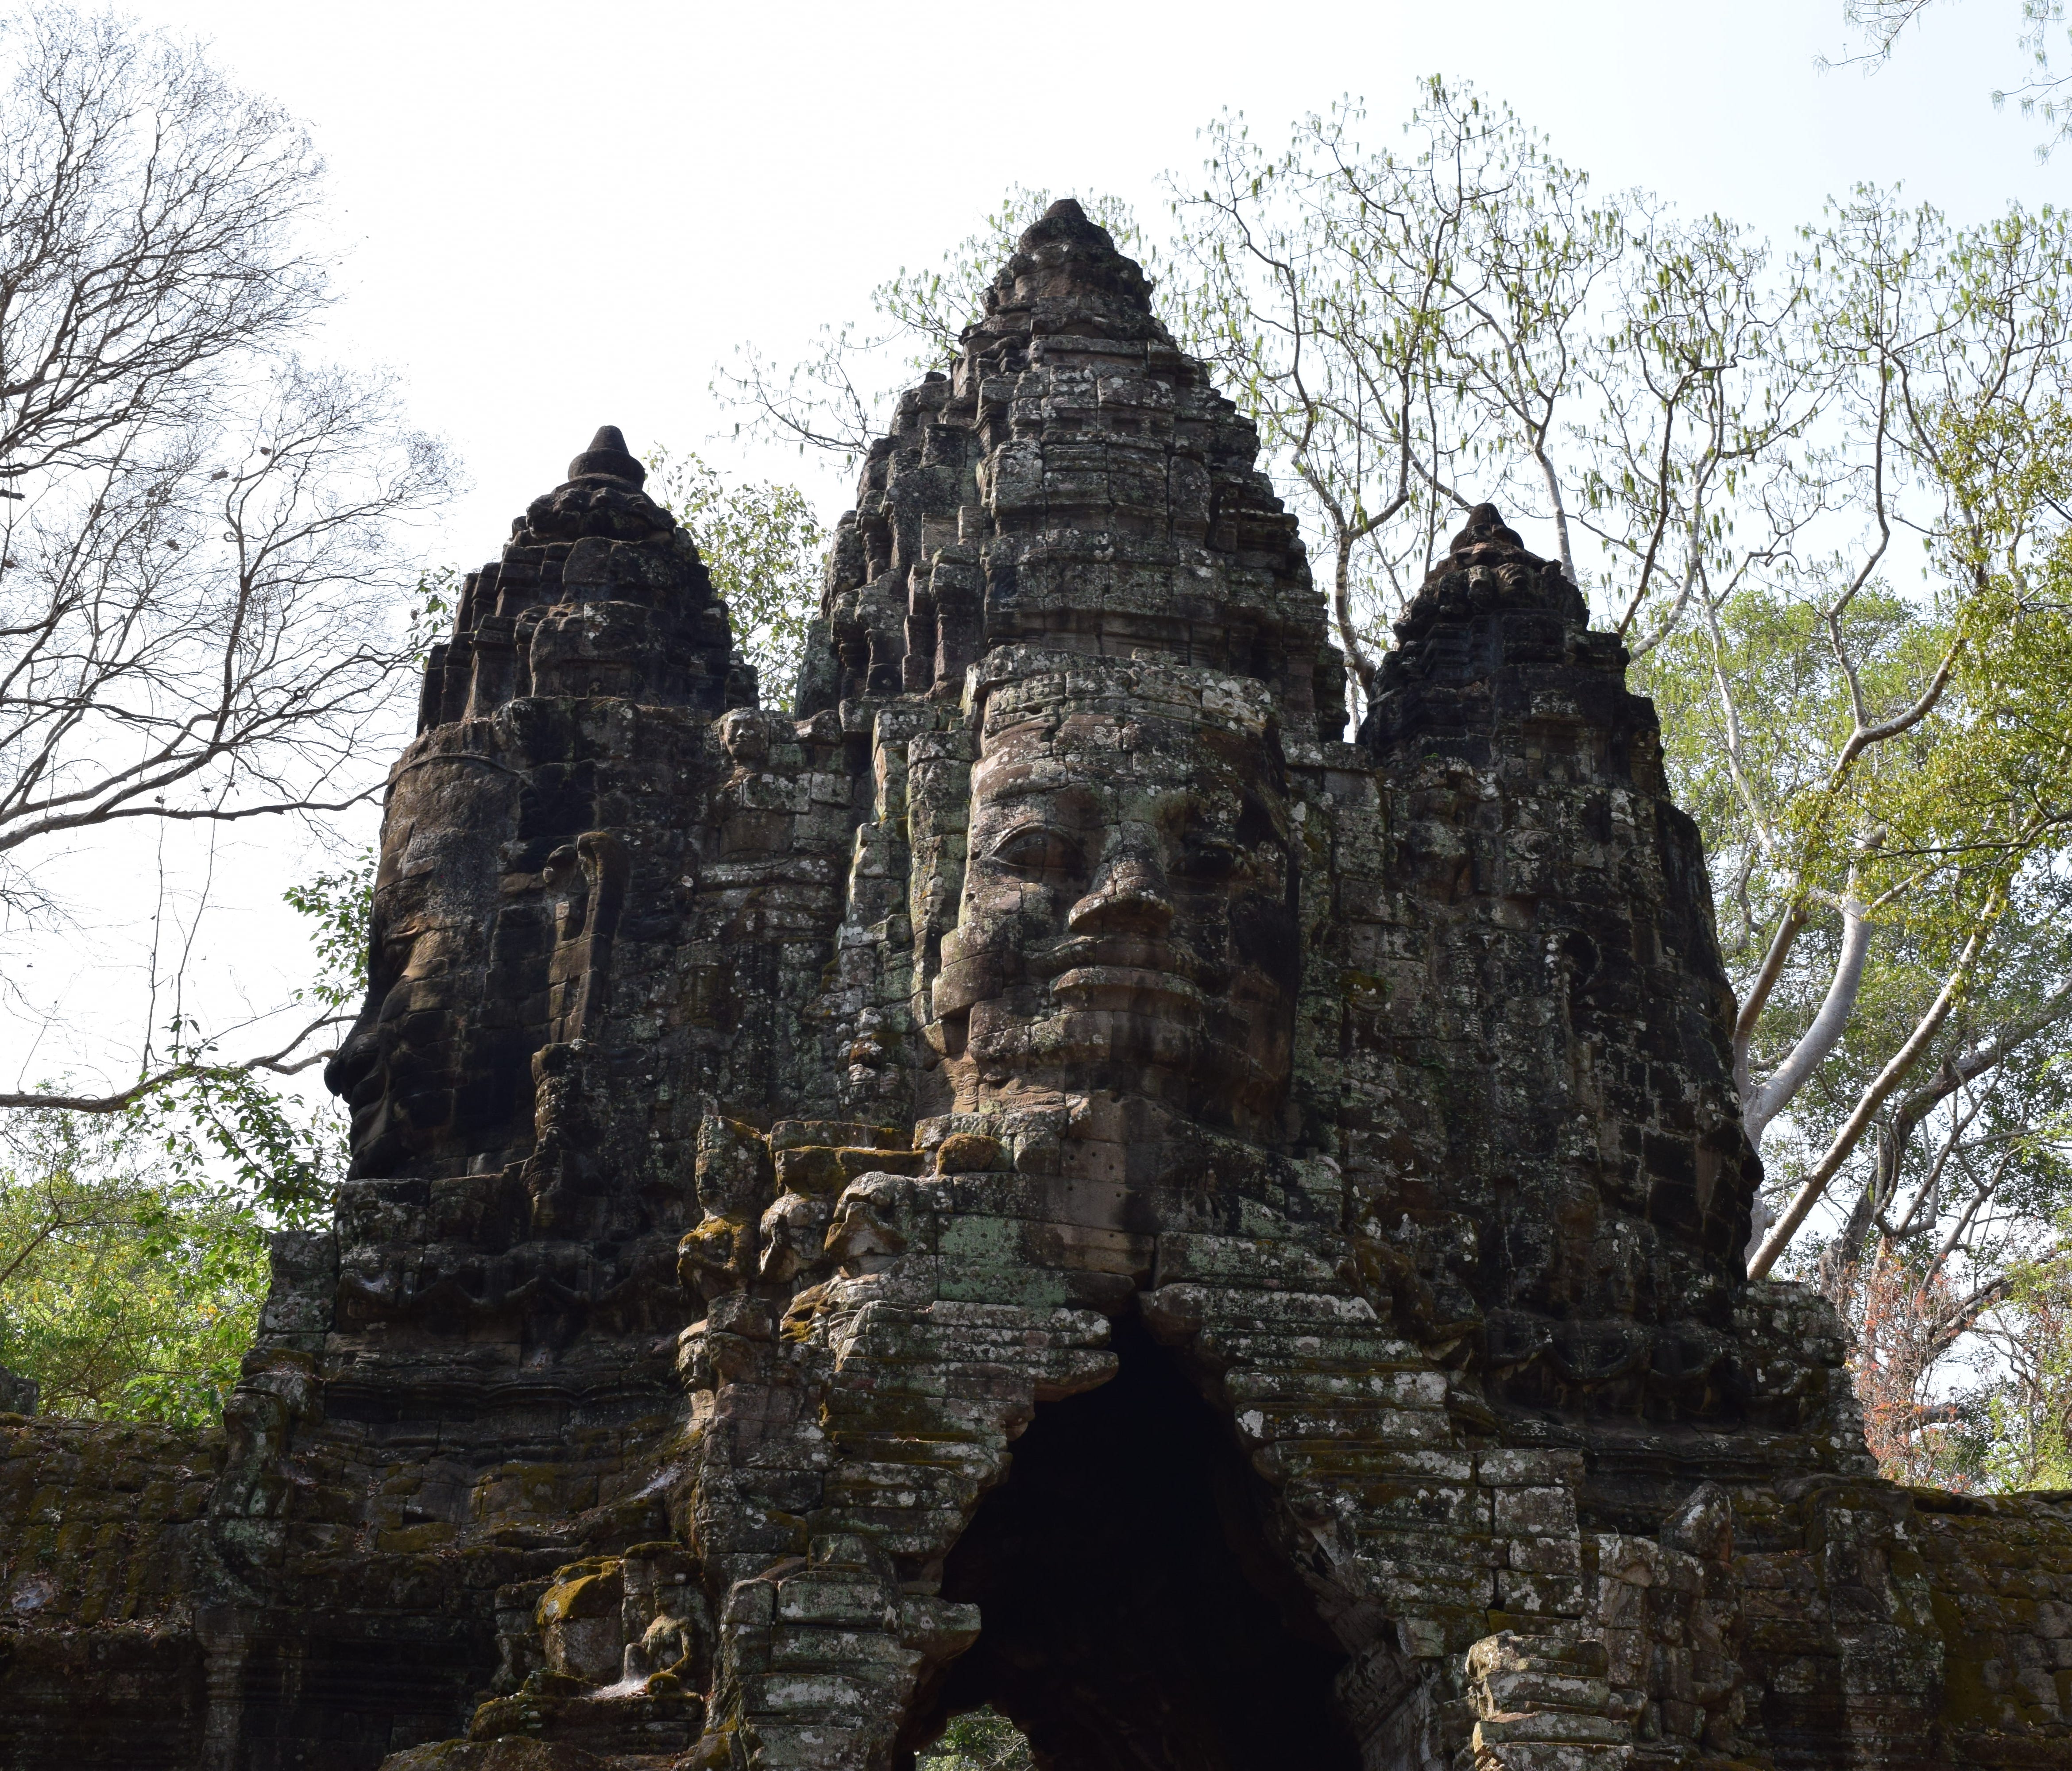 The trademark of Angkor Thom is its four-sided structures with faces looking in every direction. In addition to the five gate towers (this is the North Gate), there are 49 more four-faced towers in the interior temple, for a total of 216 faces.